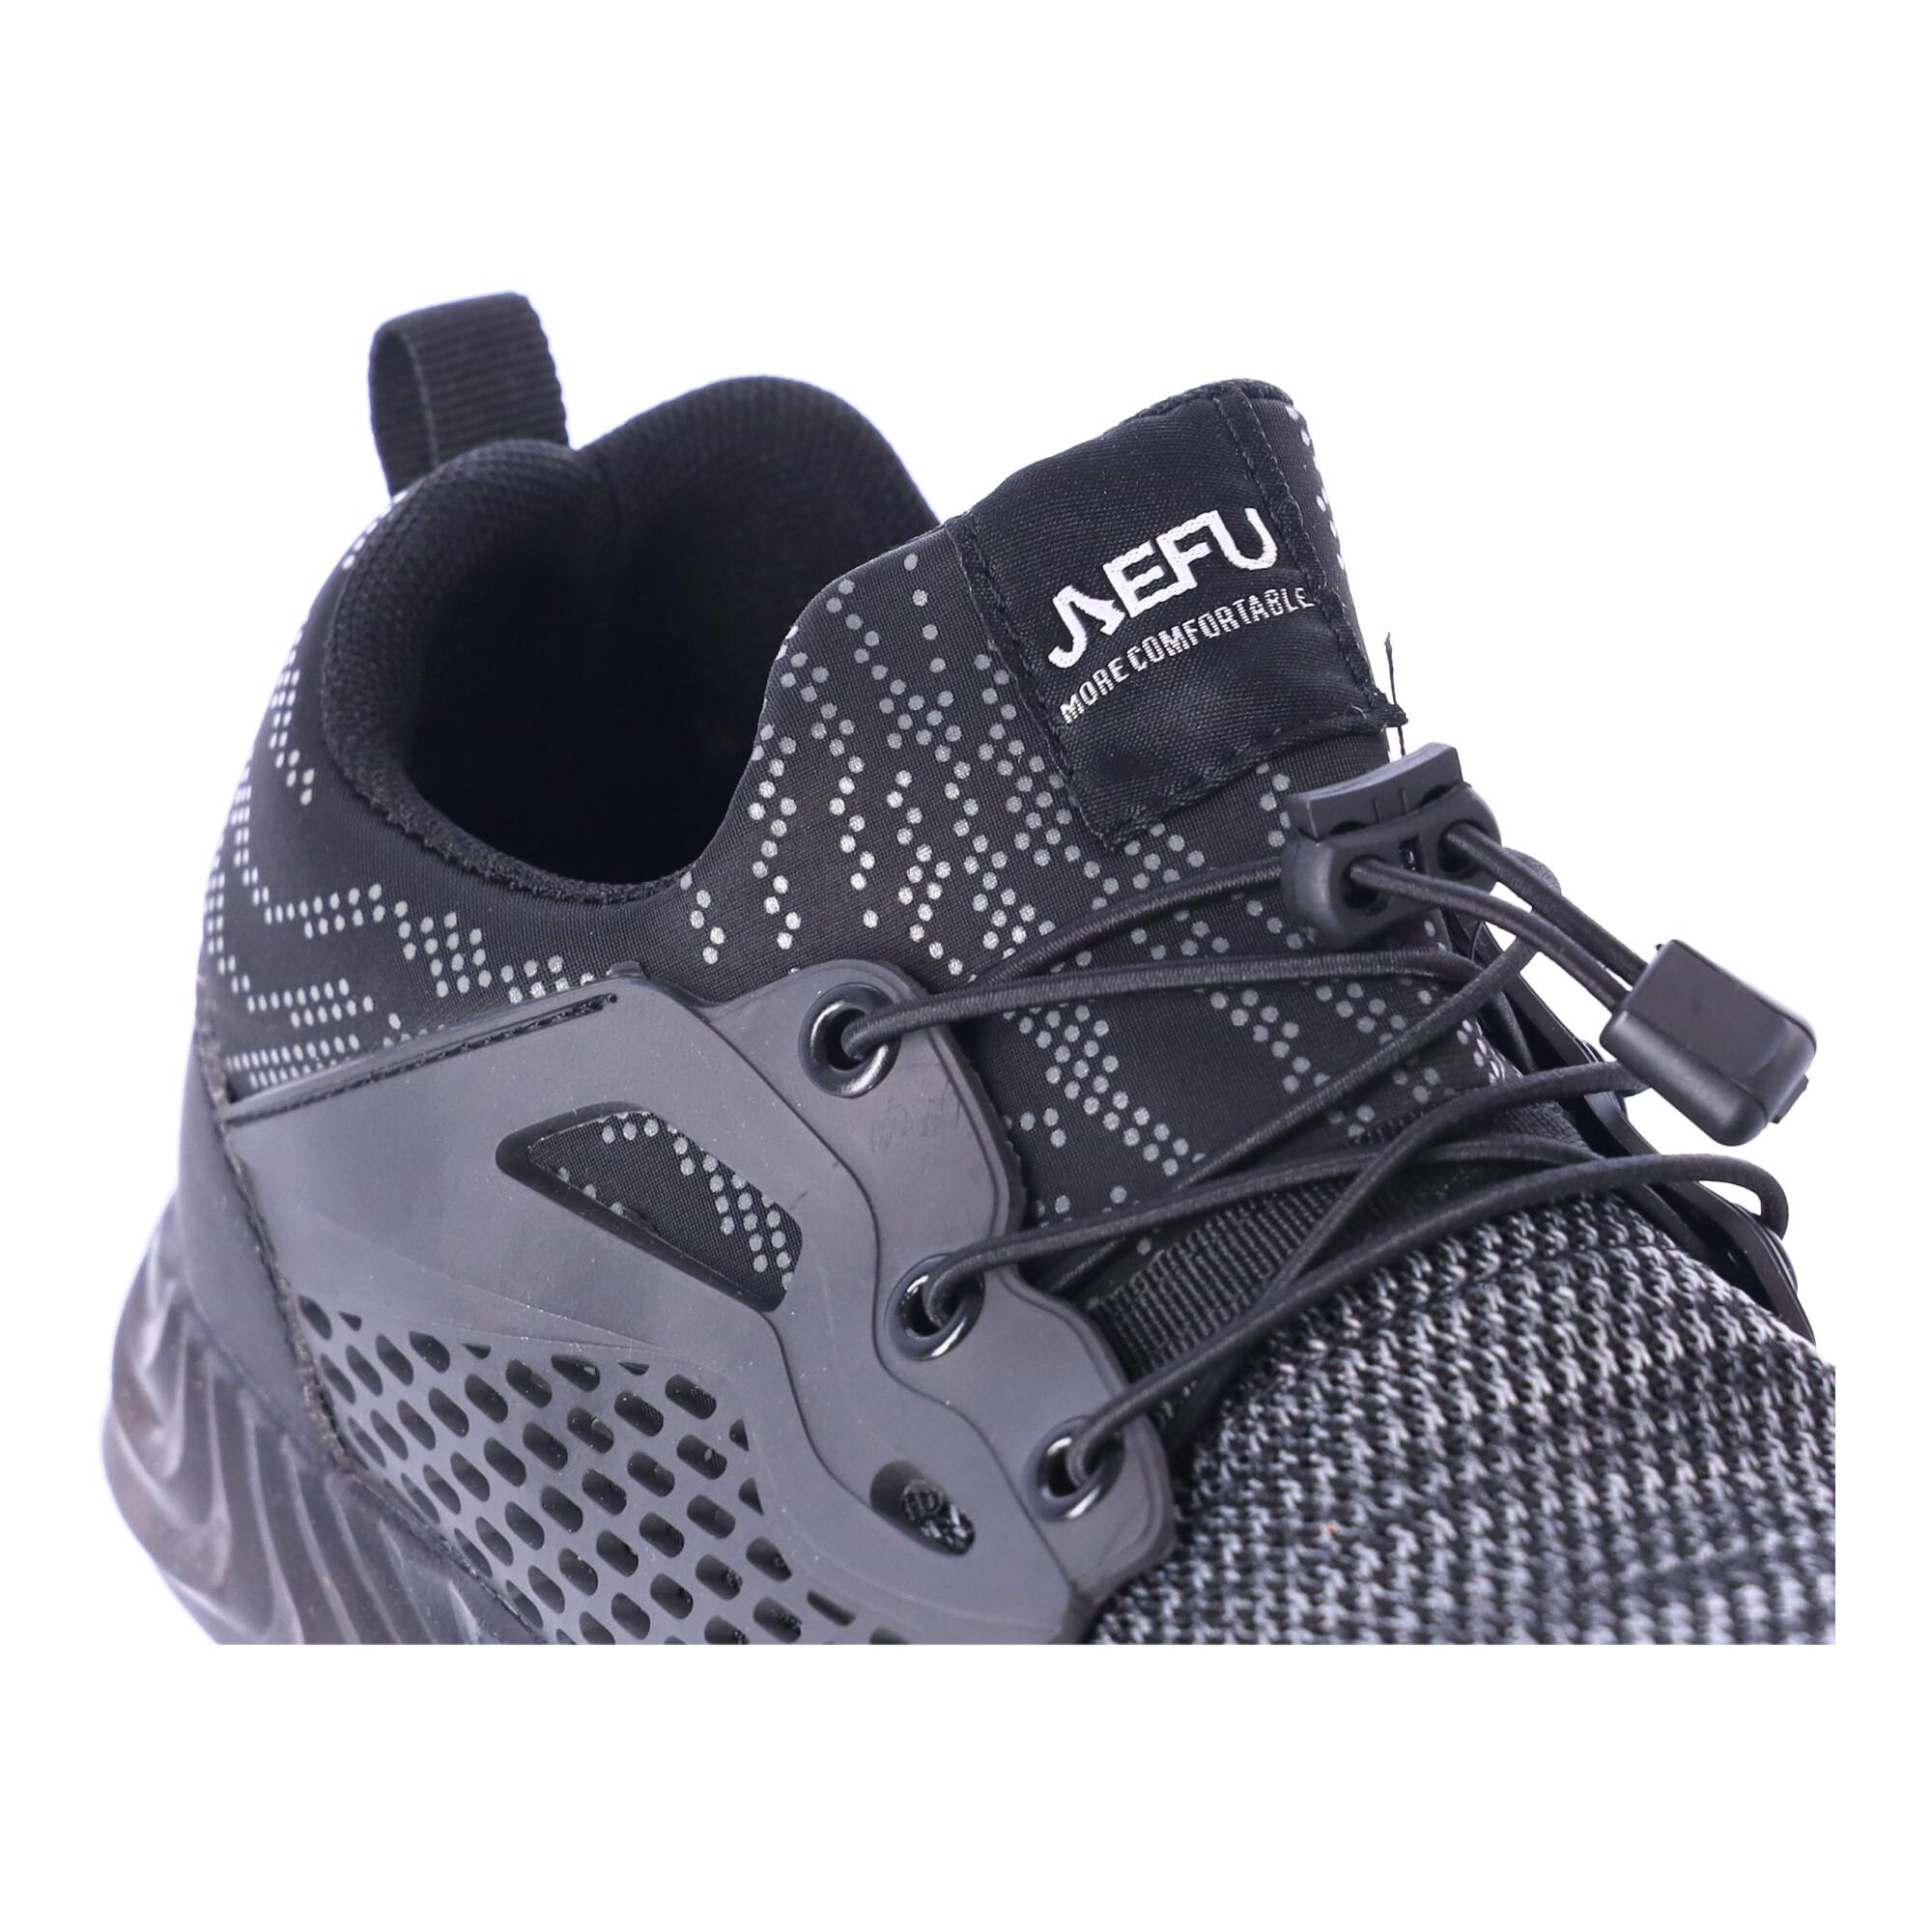 Work safety shoes "43" - gray